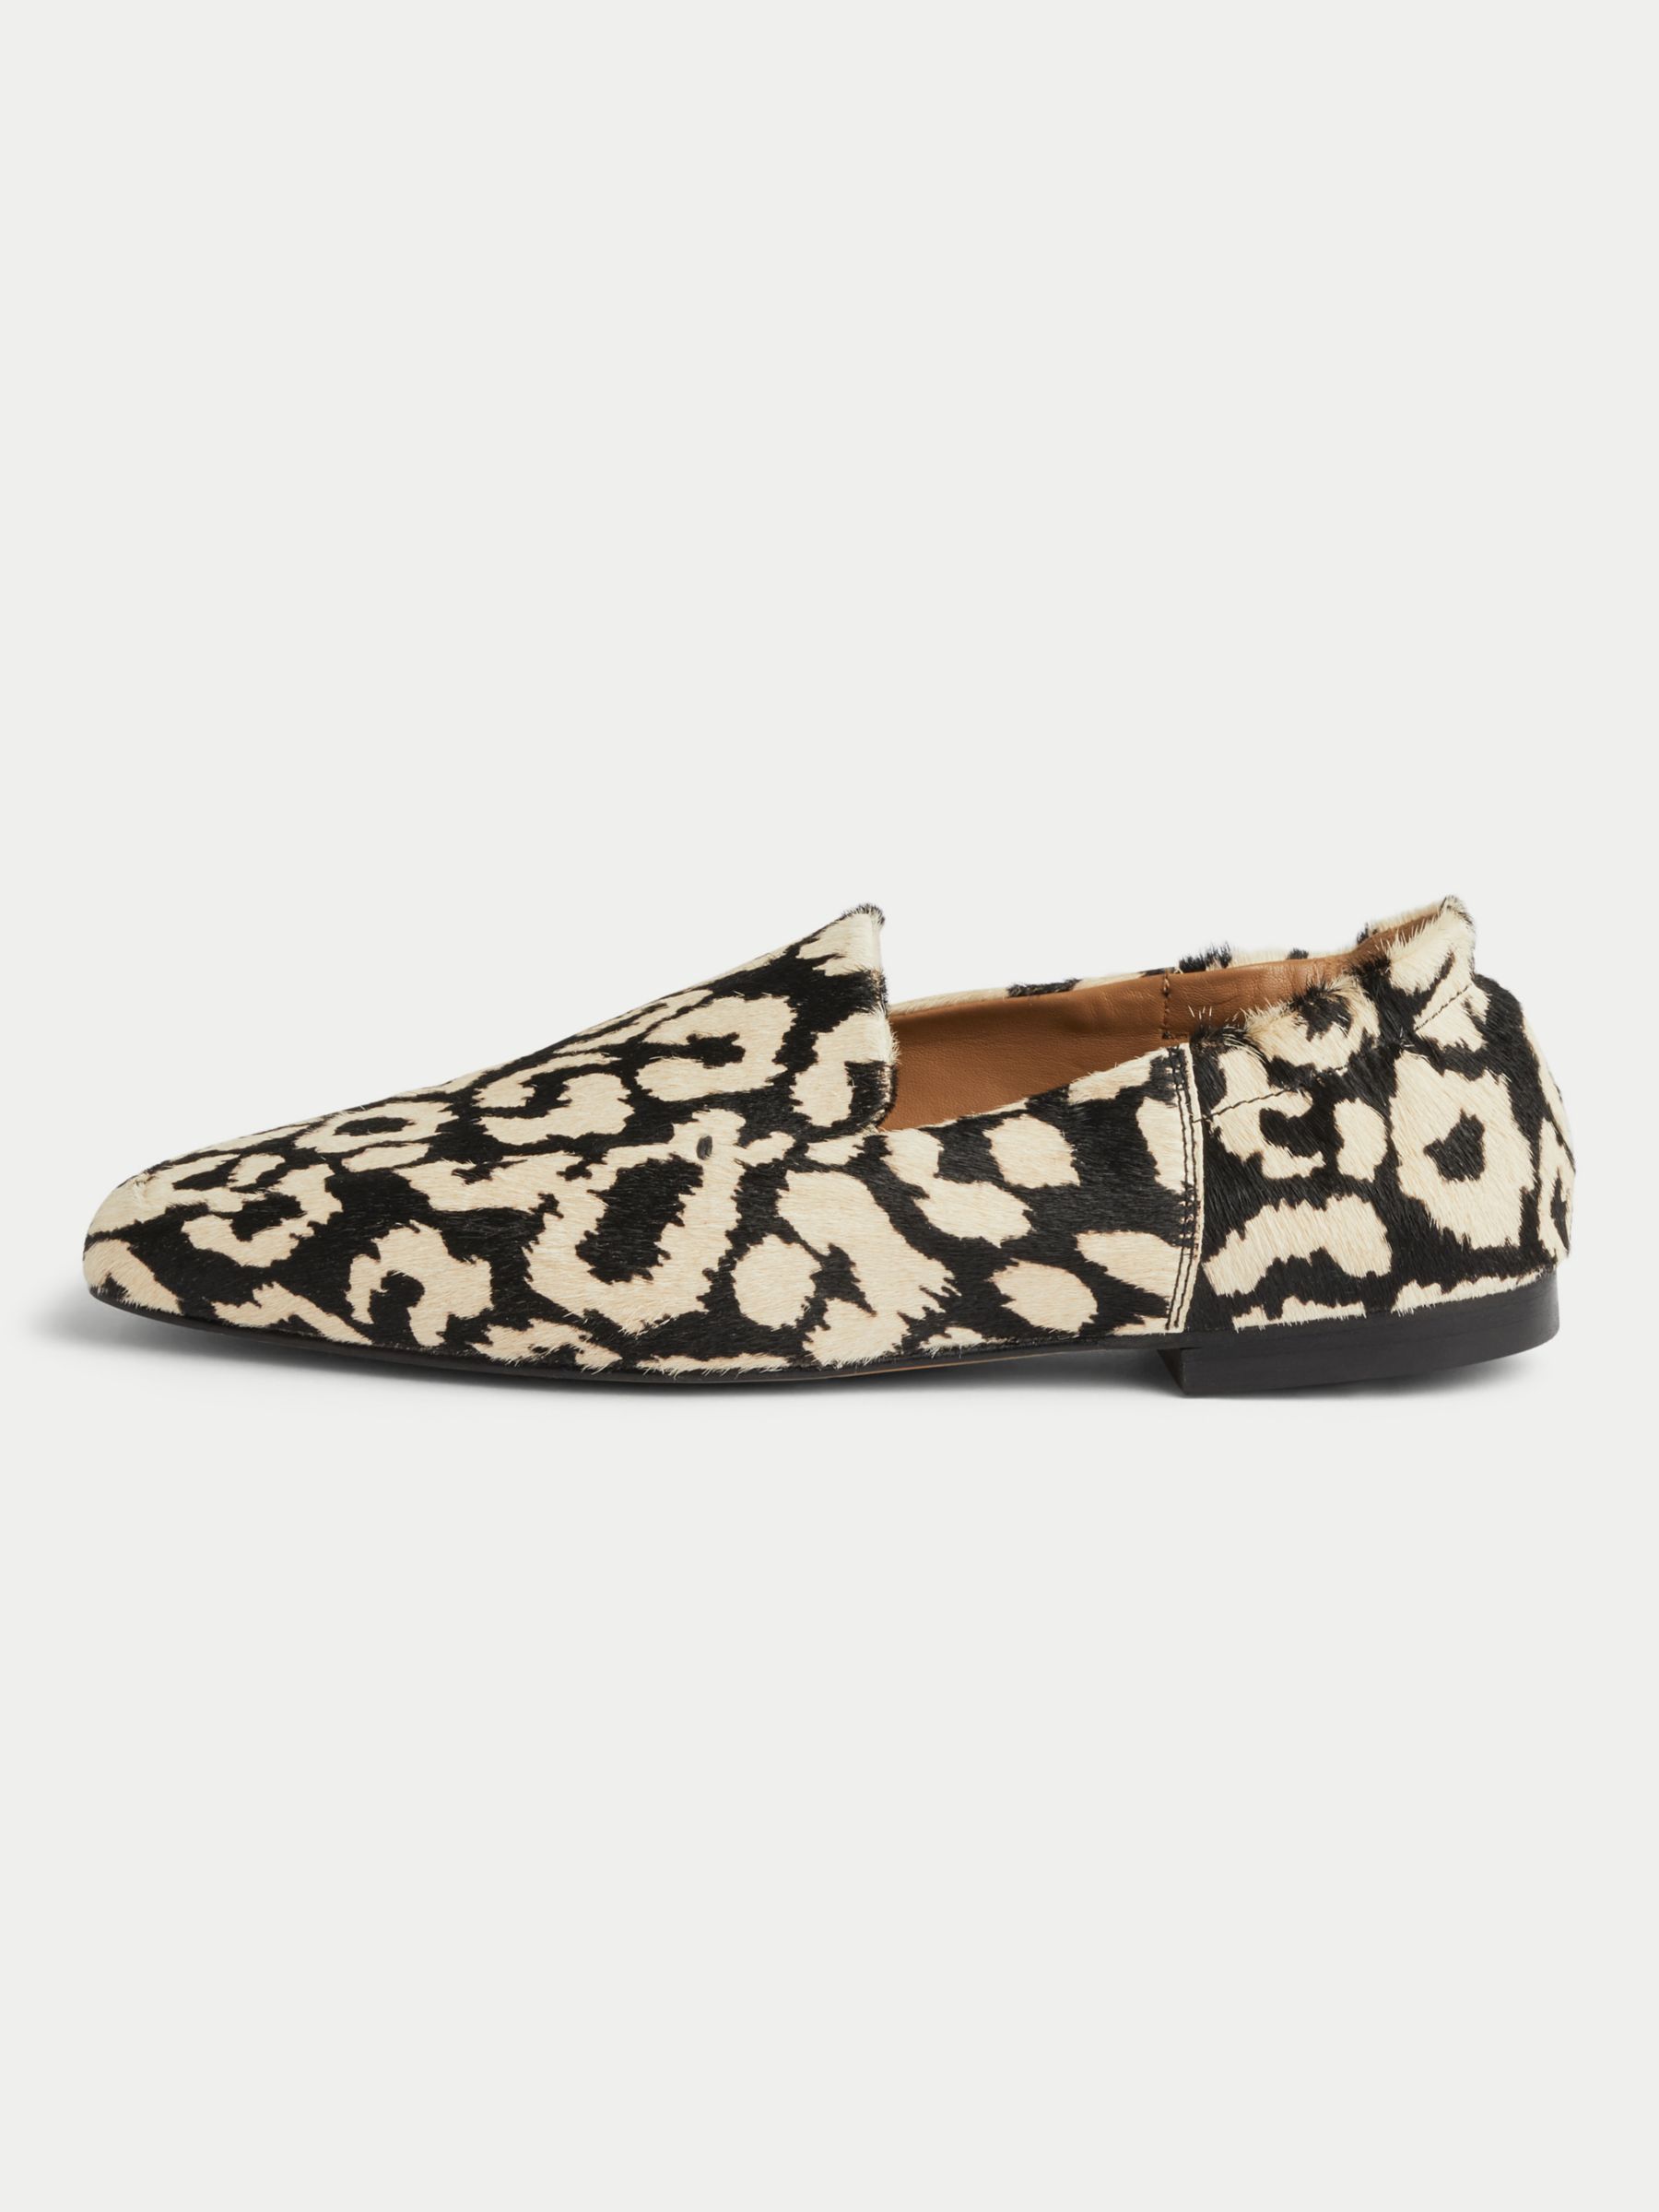 Jigsaw Chester Leather Leopard Print Loafers, Black